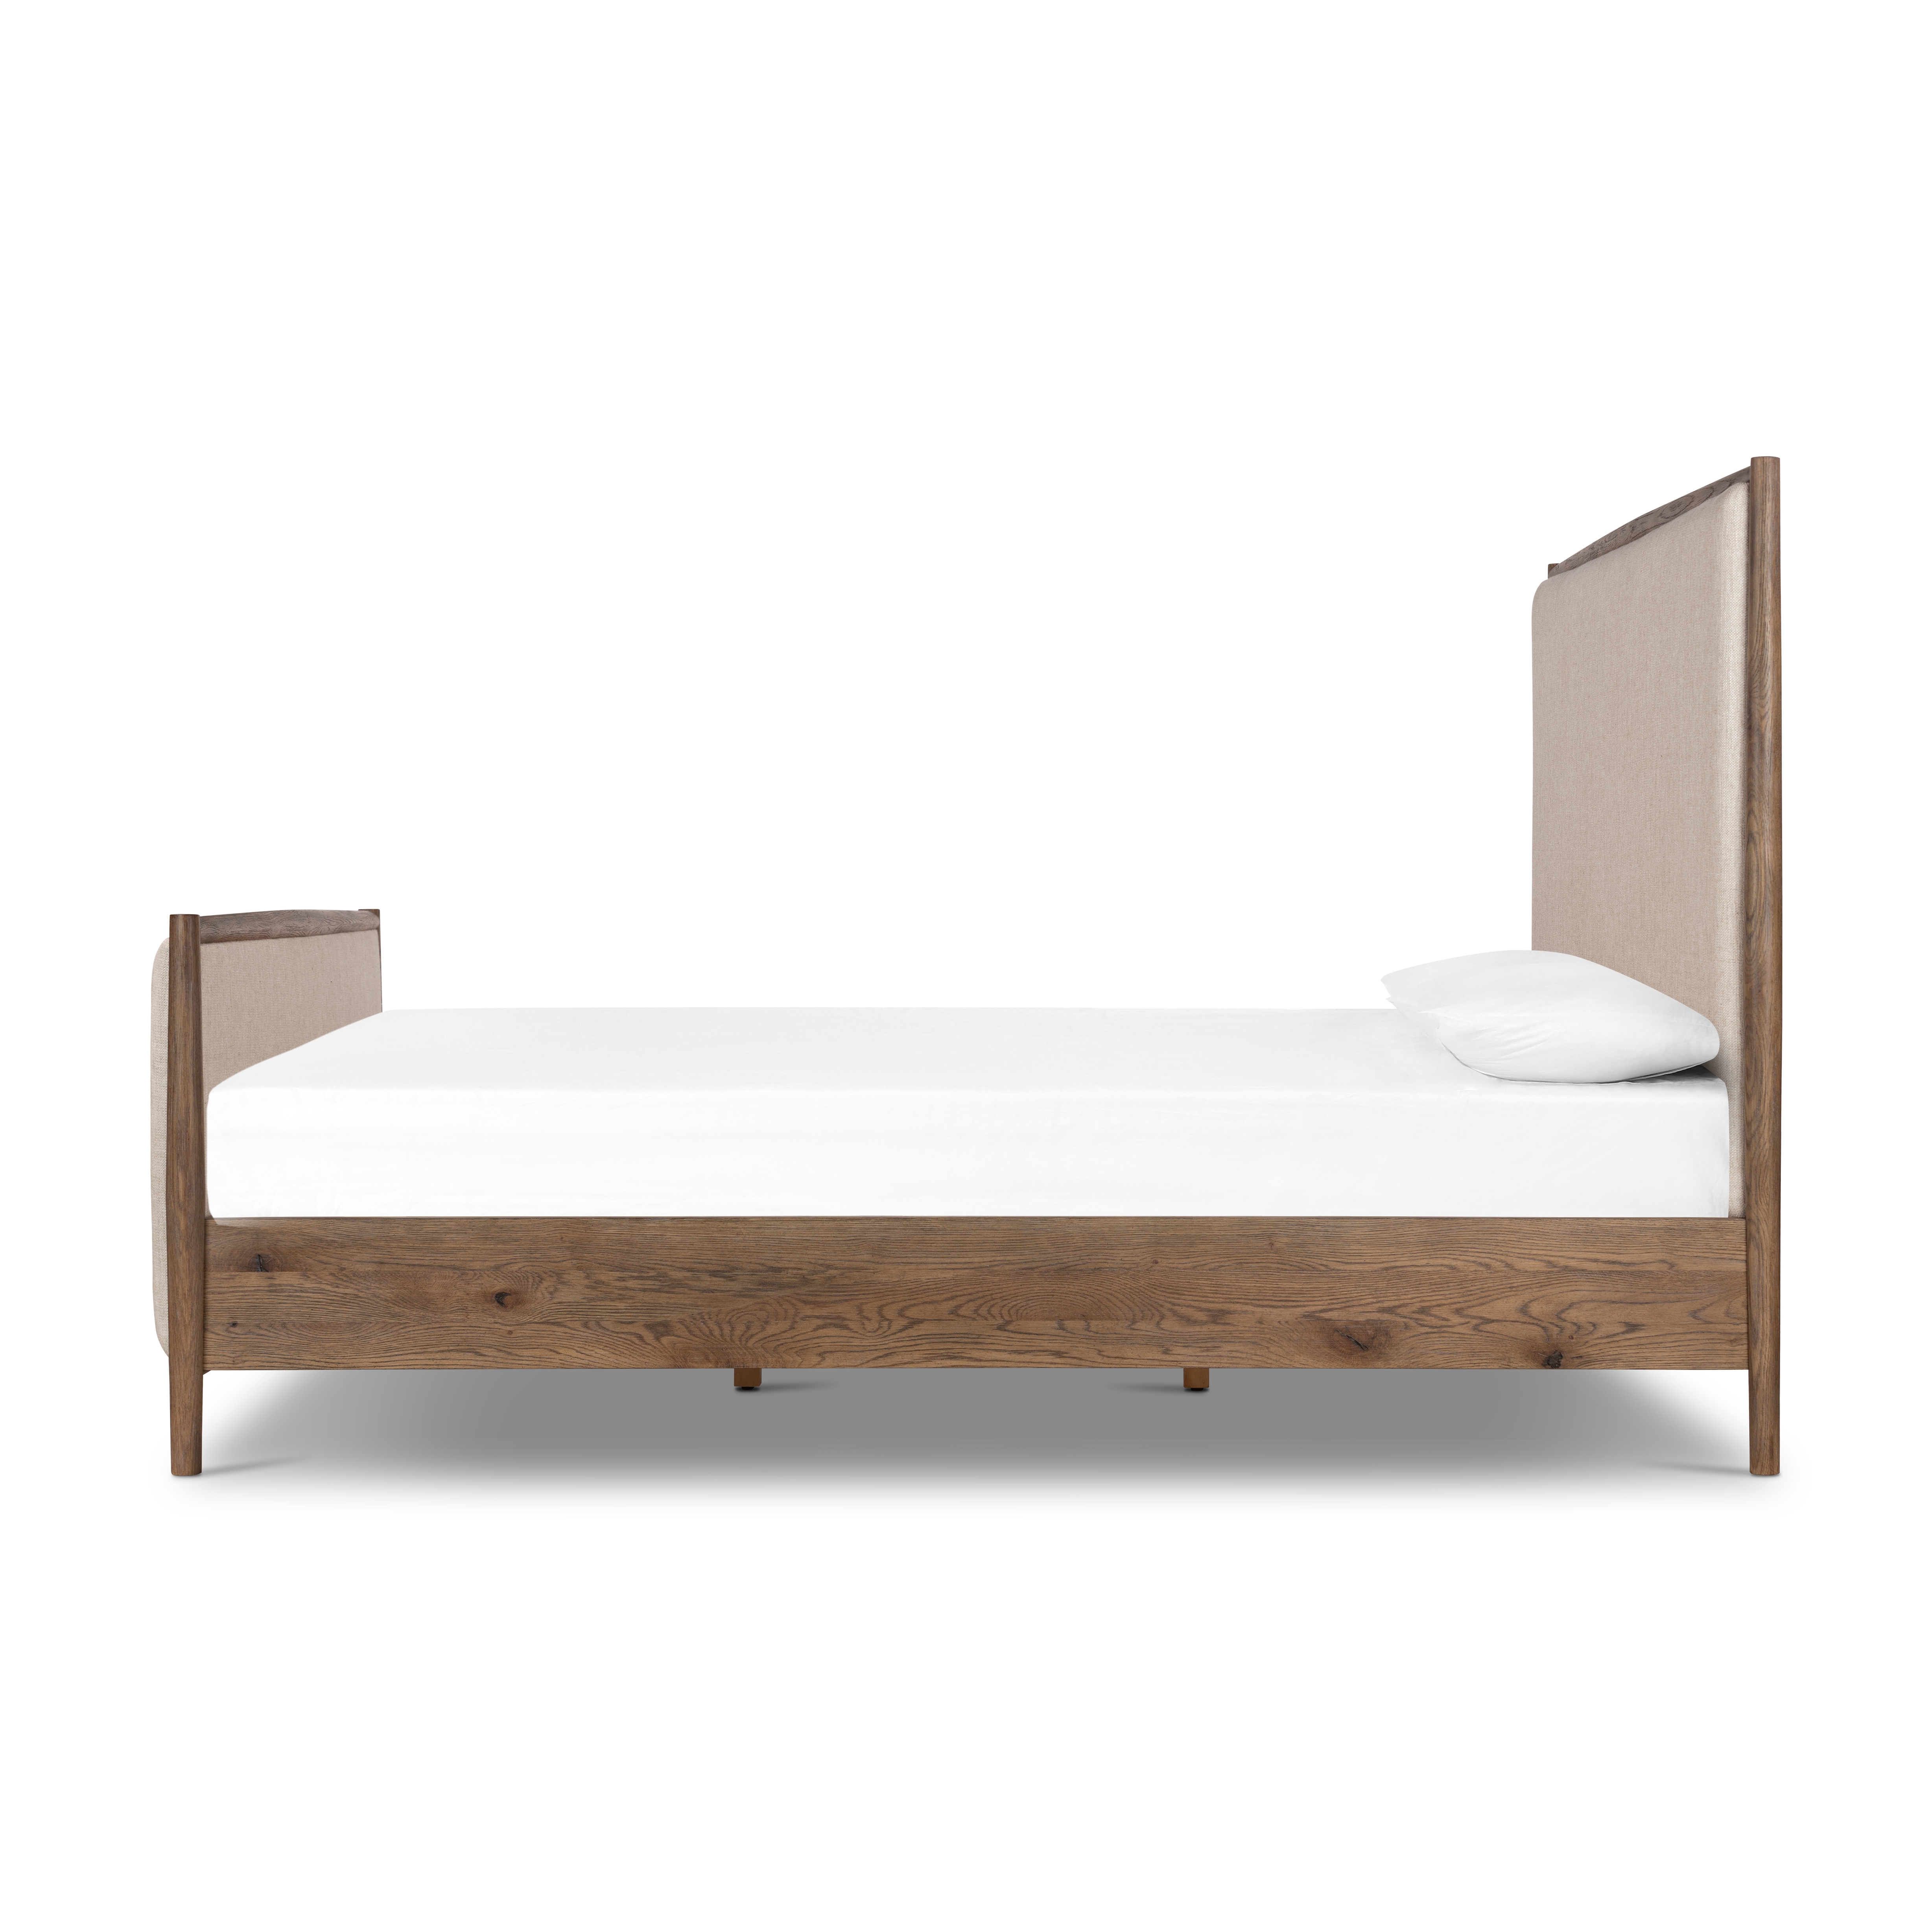 Glenview Bed-Weathered Oak-King - Image 4